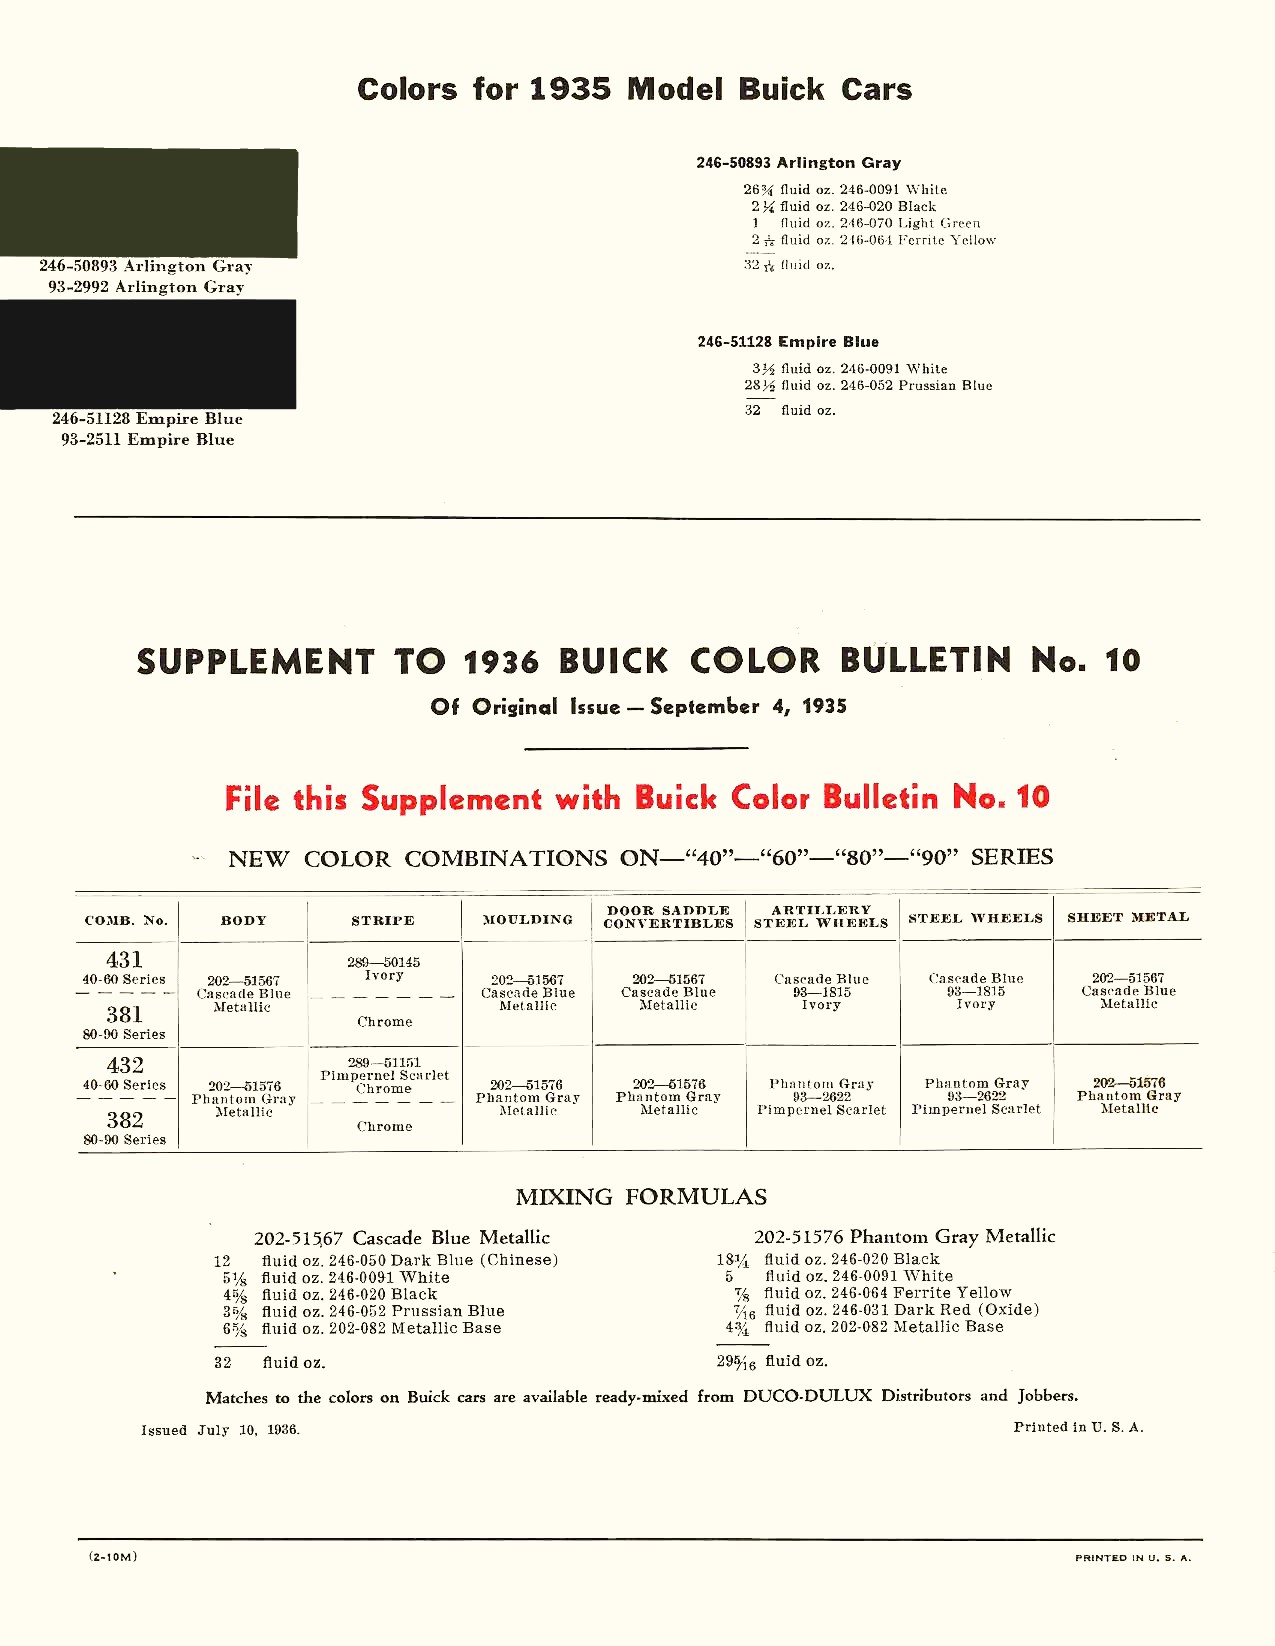 Paint Codes and Colors used on Buick in 1935